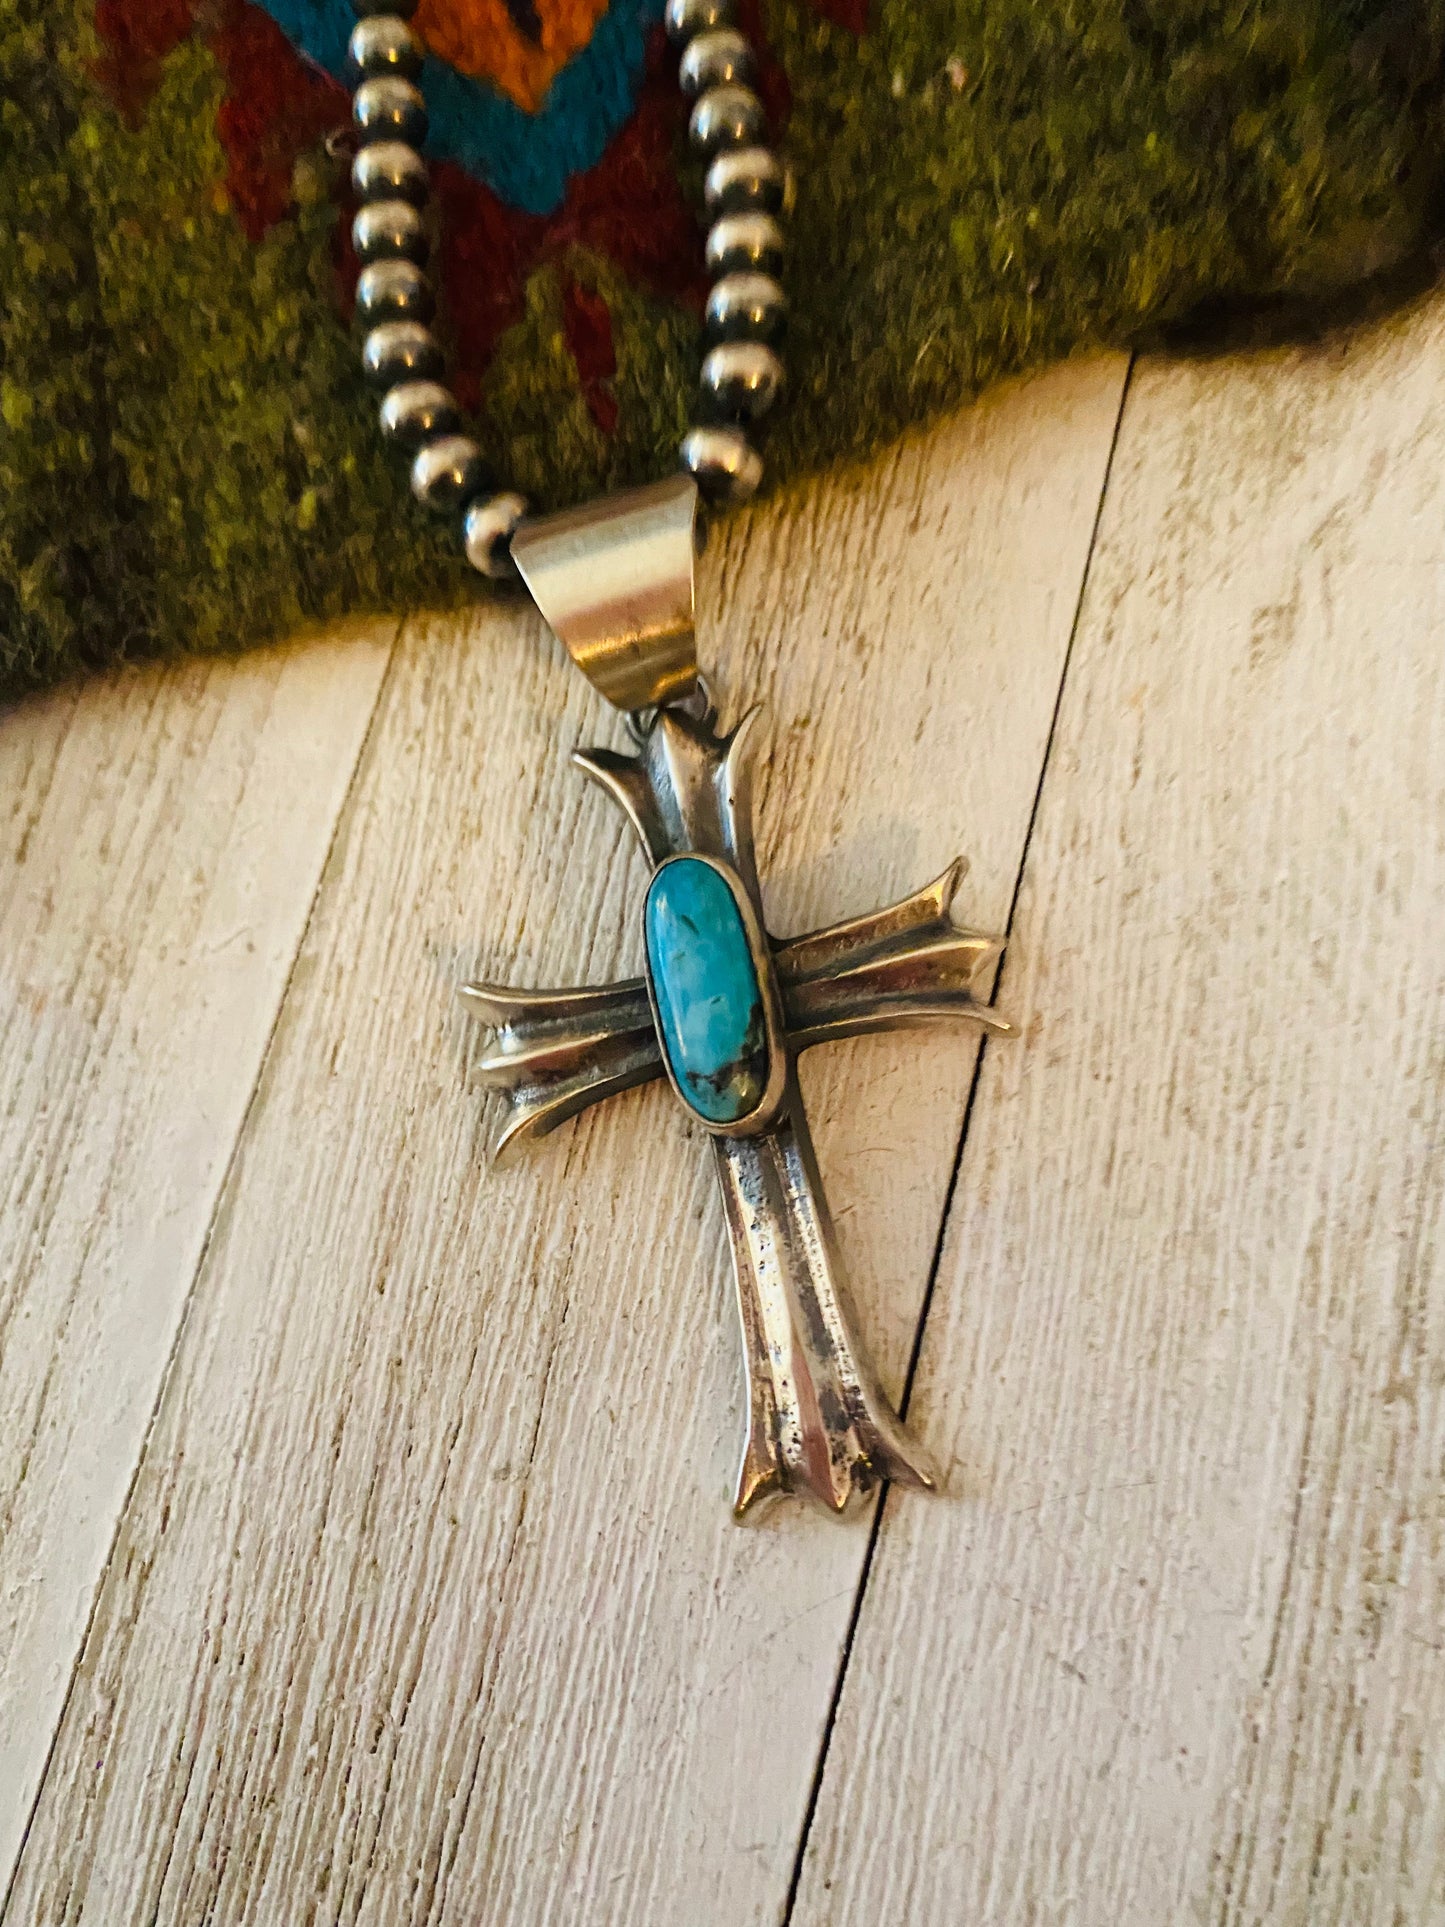 Navajo Sterling Silver & Turquoise Cross Pendant By Chimney Butte